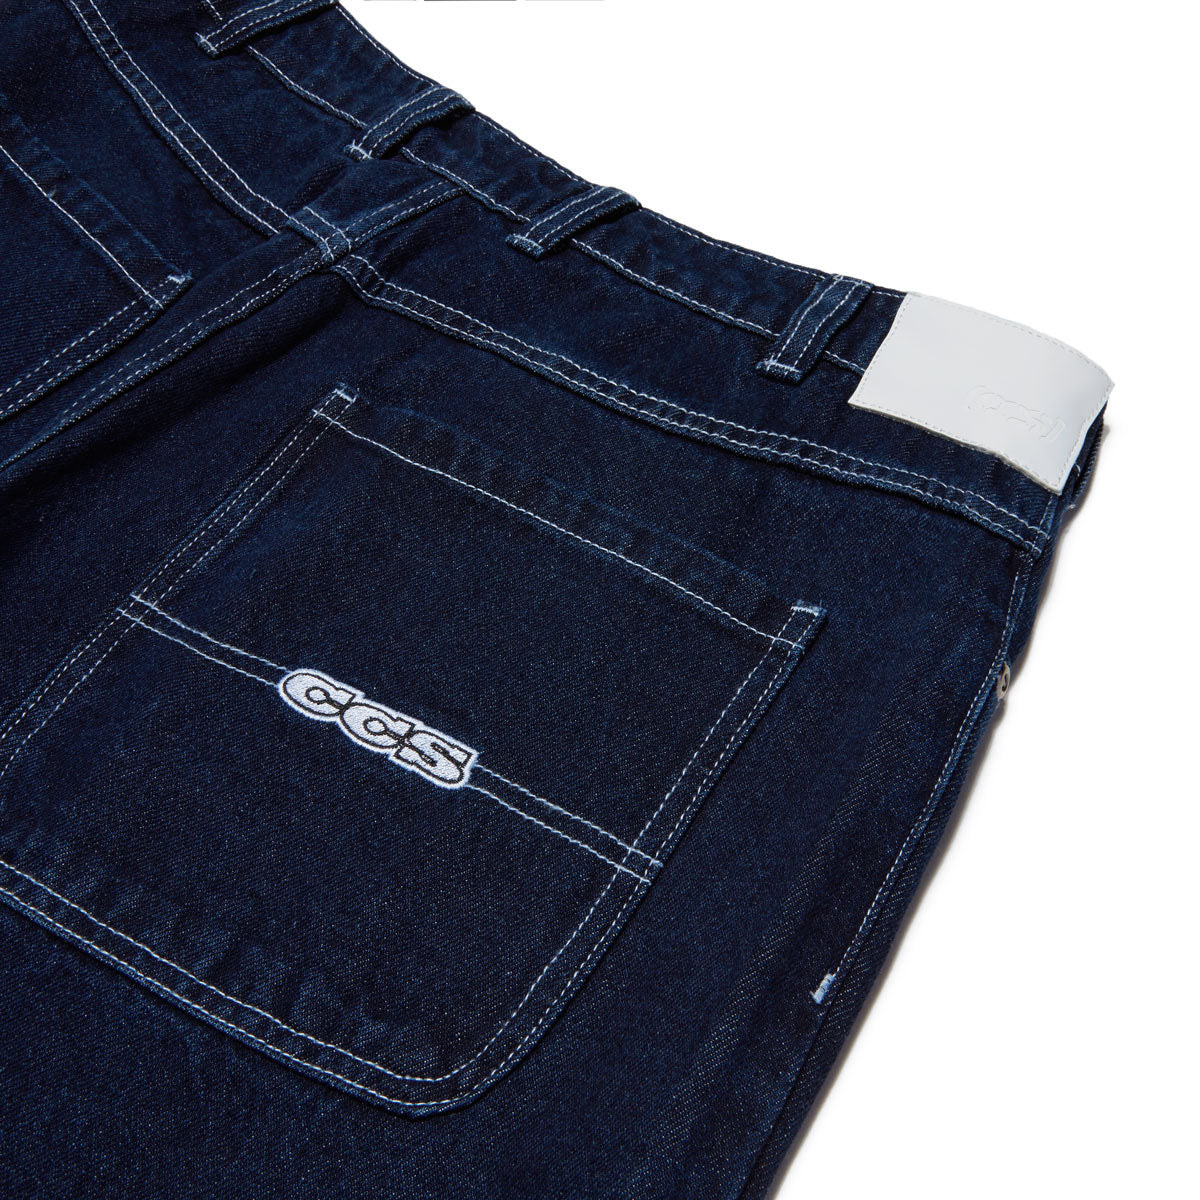 CCS Baggy Taper Denim Jeans - Overdyed Navy image 6